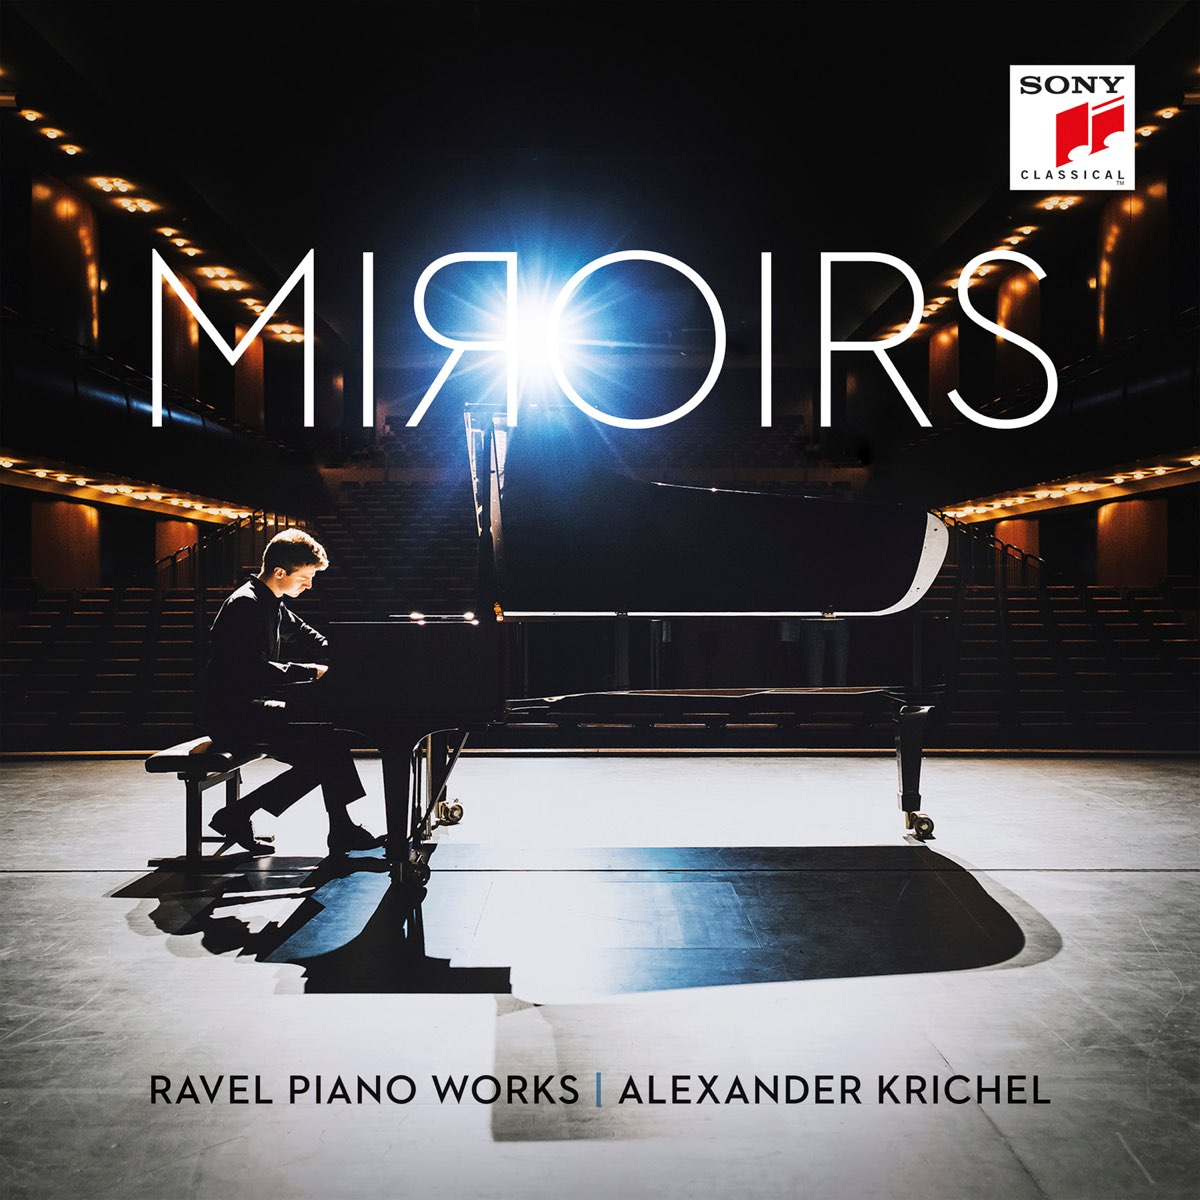 Miroirs - Ravel Piano Works by Alexander Krichel on Apple Music